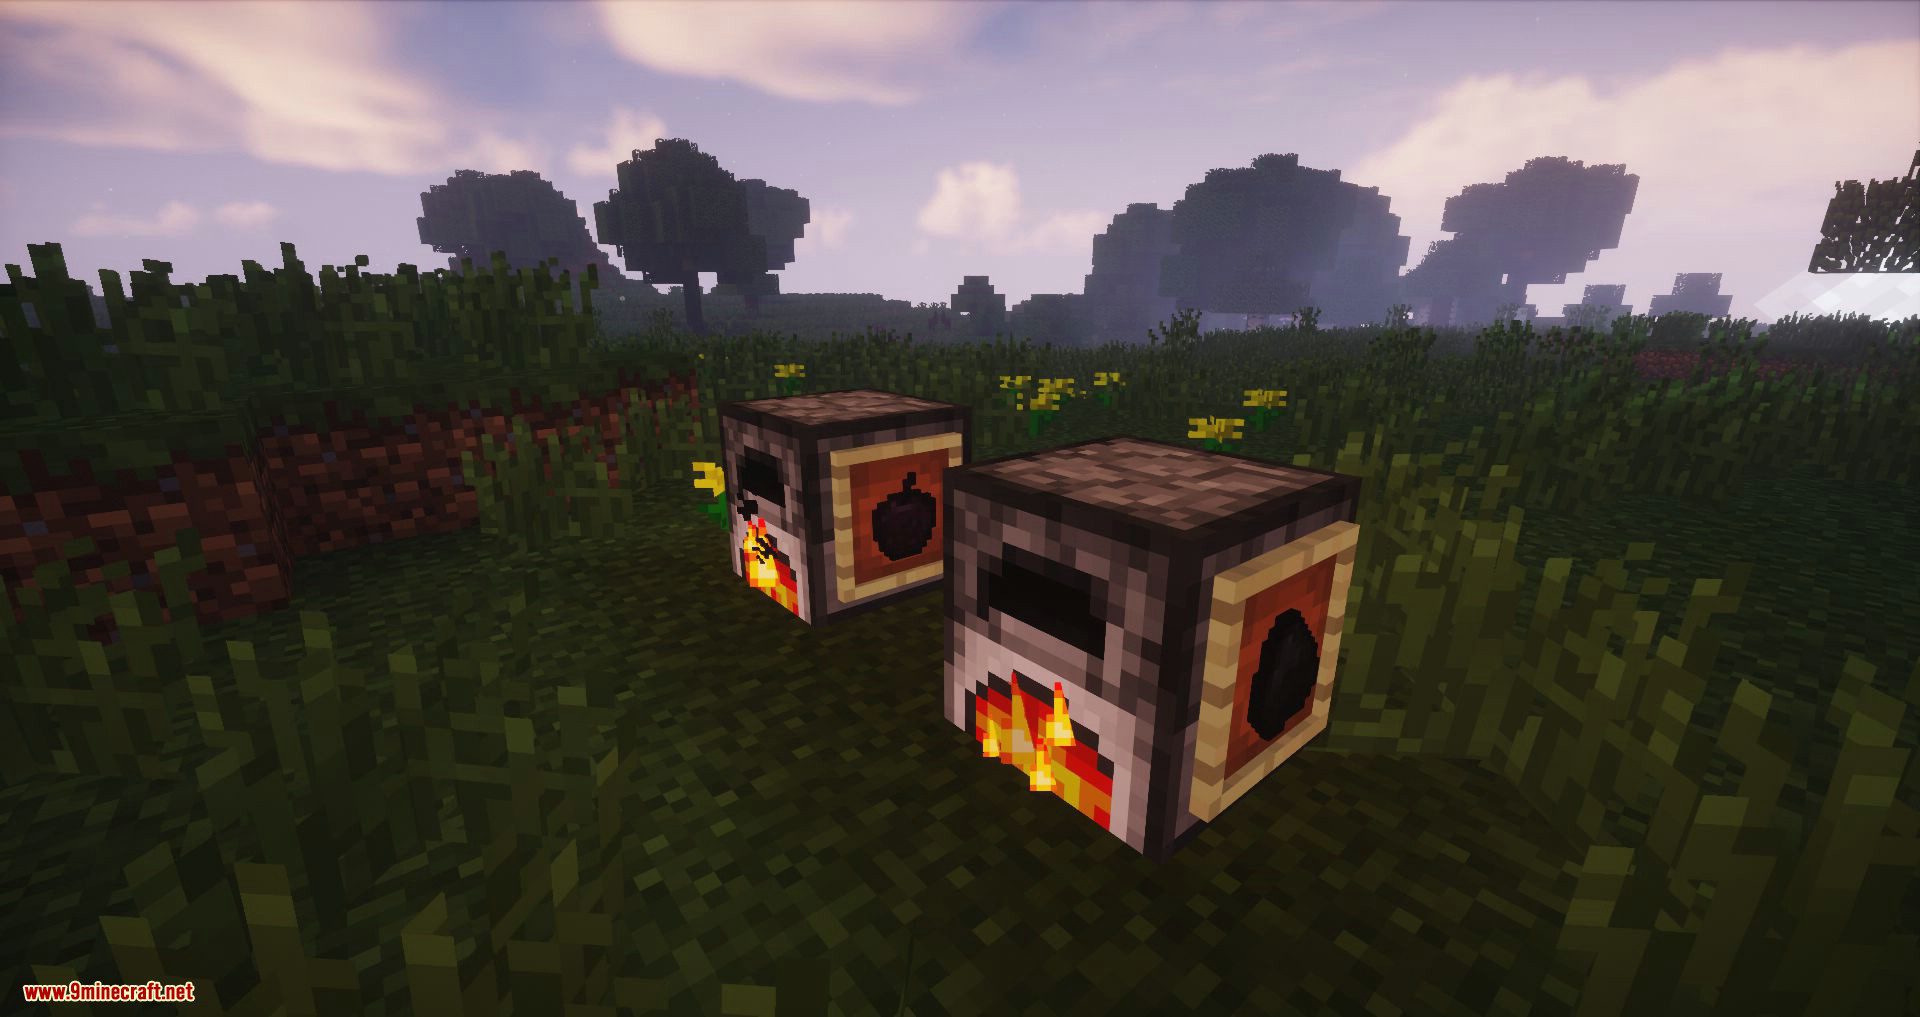 More Charcoal Mod (1.18.2, 1.17.1) - Charcoal Based on Items & Blocks 6